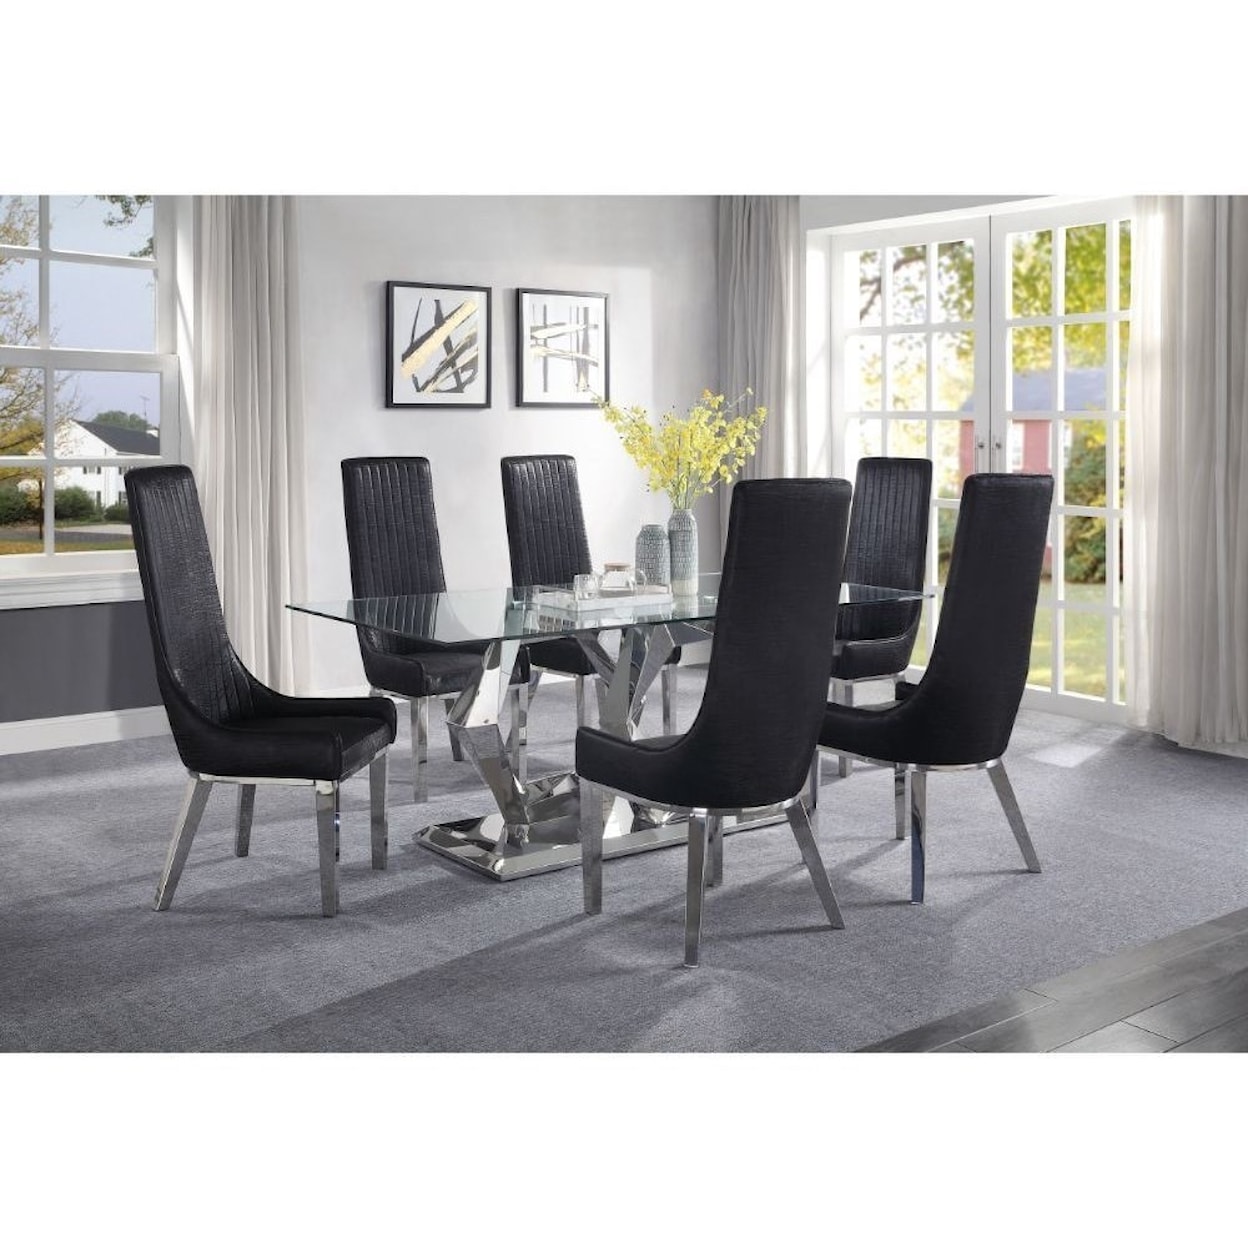 Acme Furniture Gianna 7-Piece Table and Chair Set